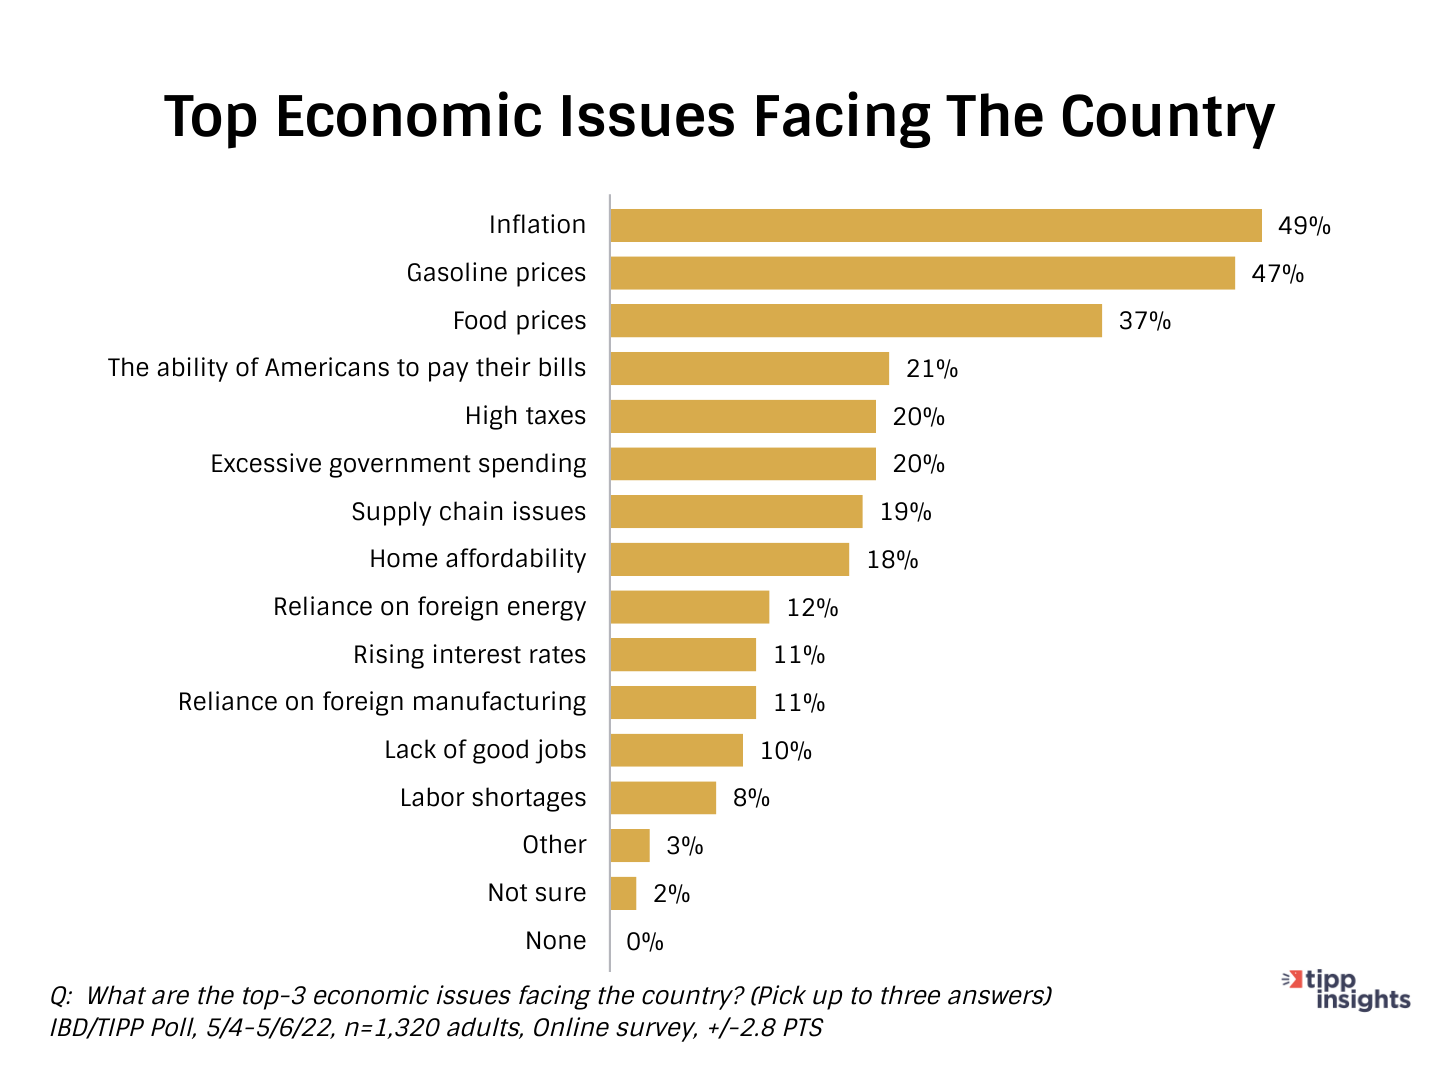 IBD/TIPP Poll Results: Top Economic issues facing the United States